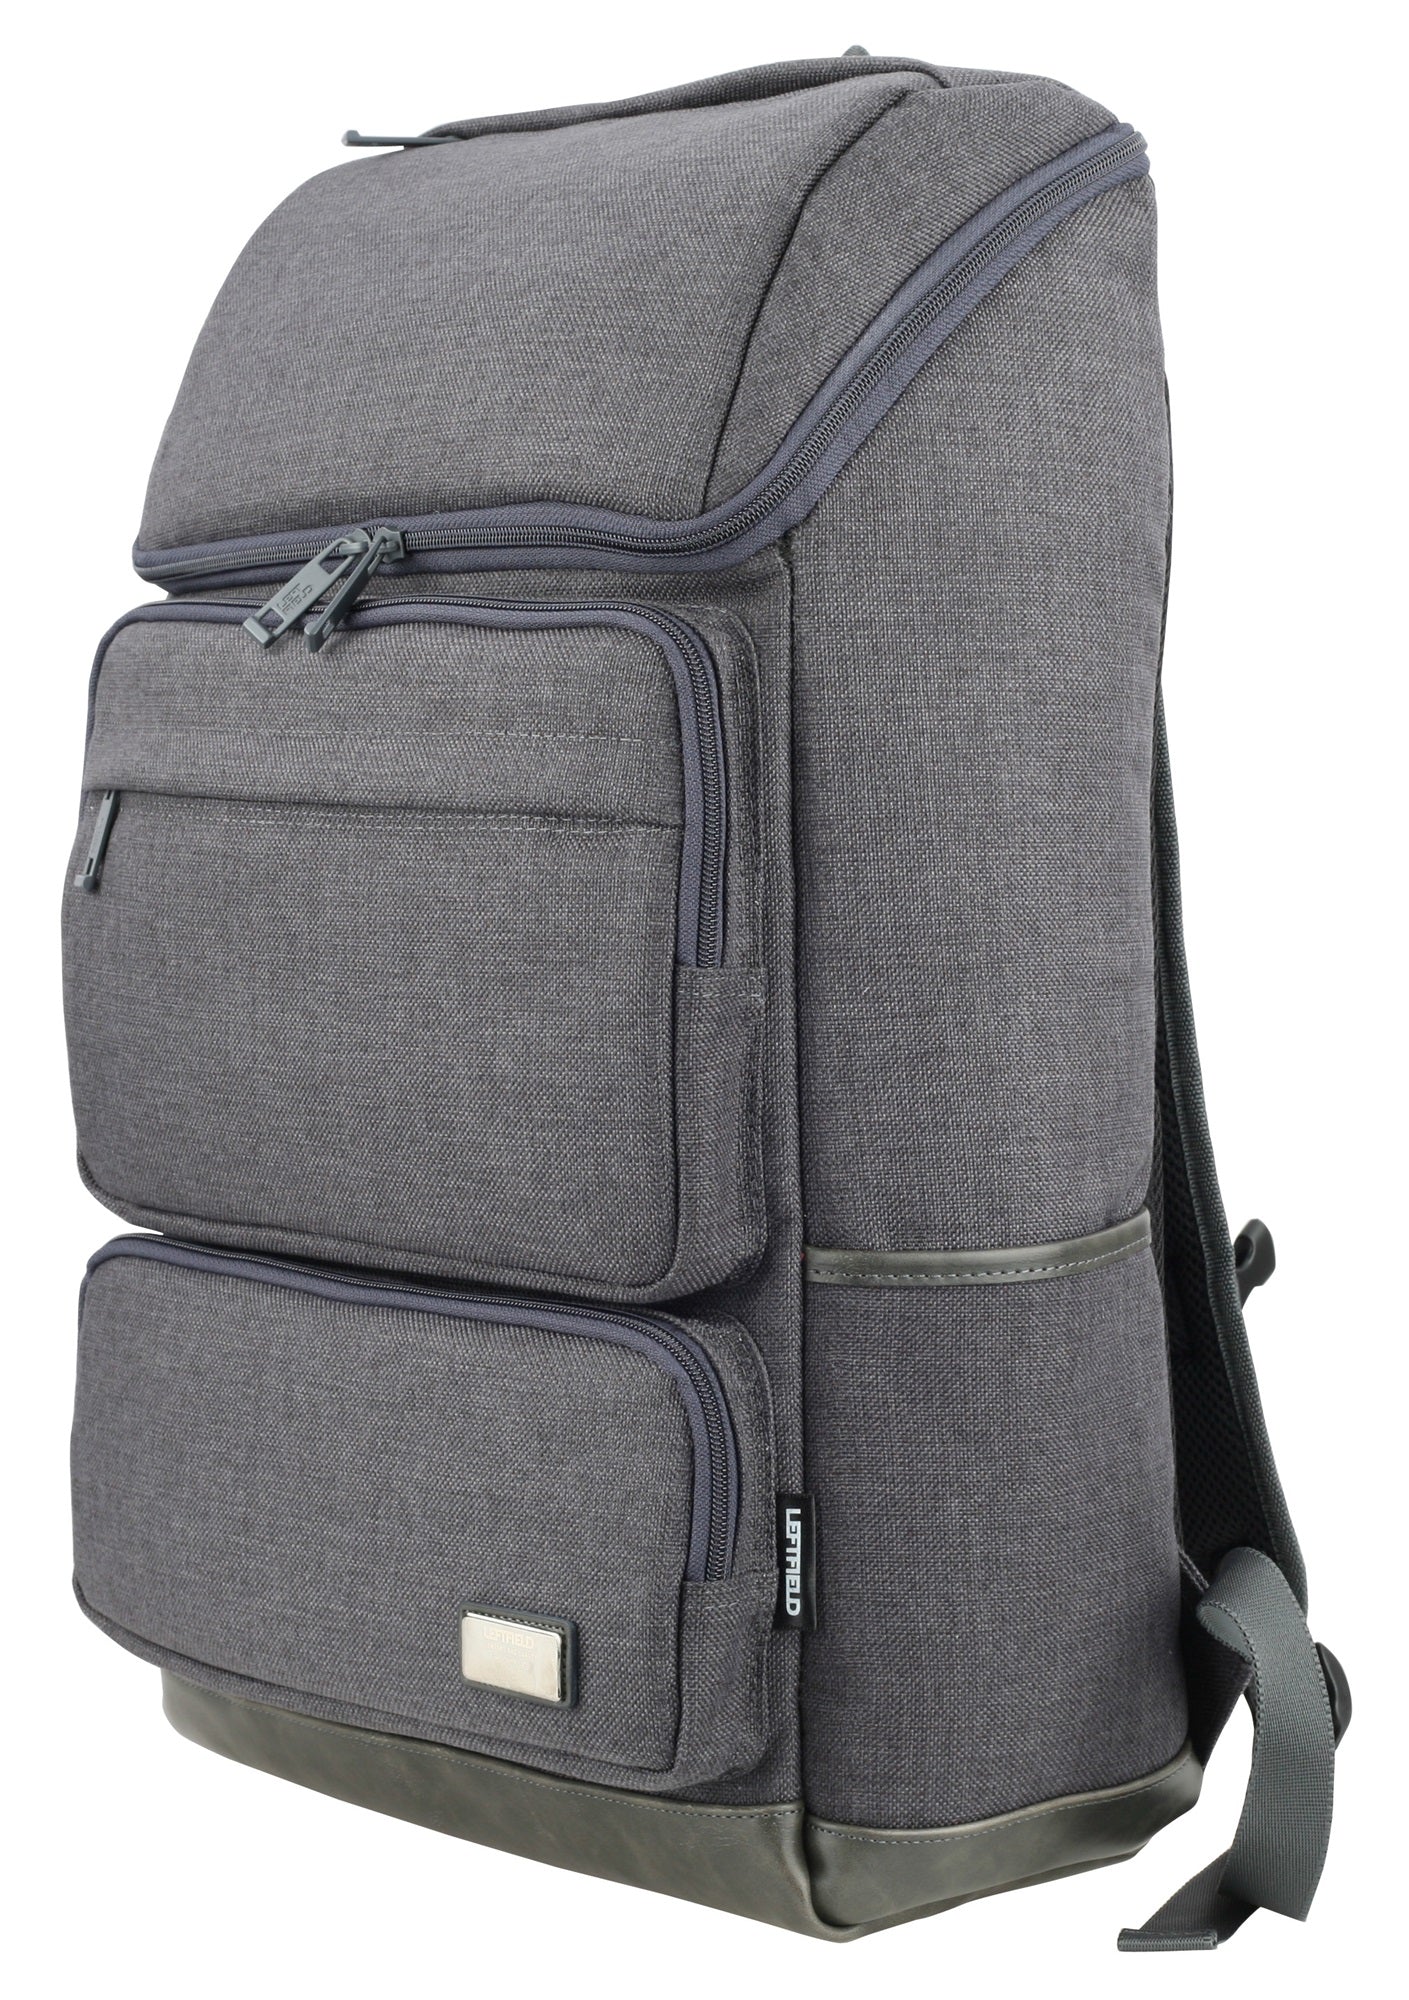 Black Canvas Casual Laptop Daypack Travel Backpacks